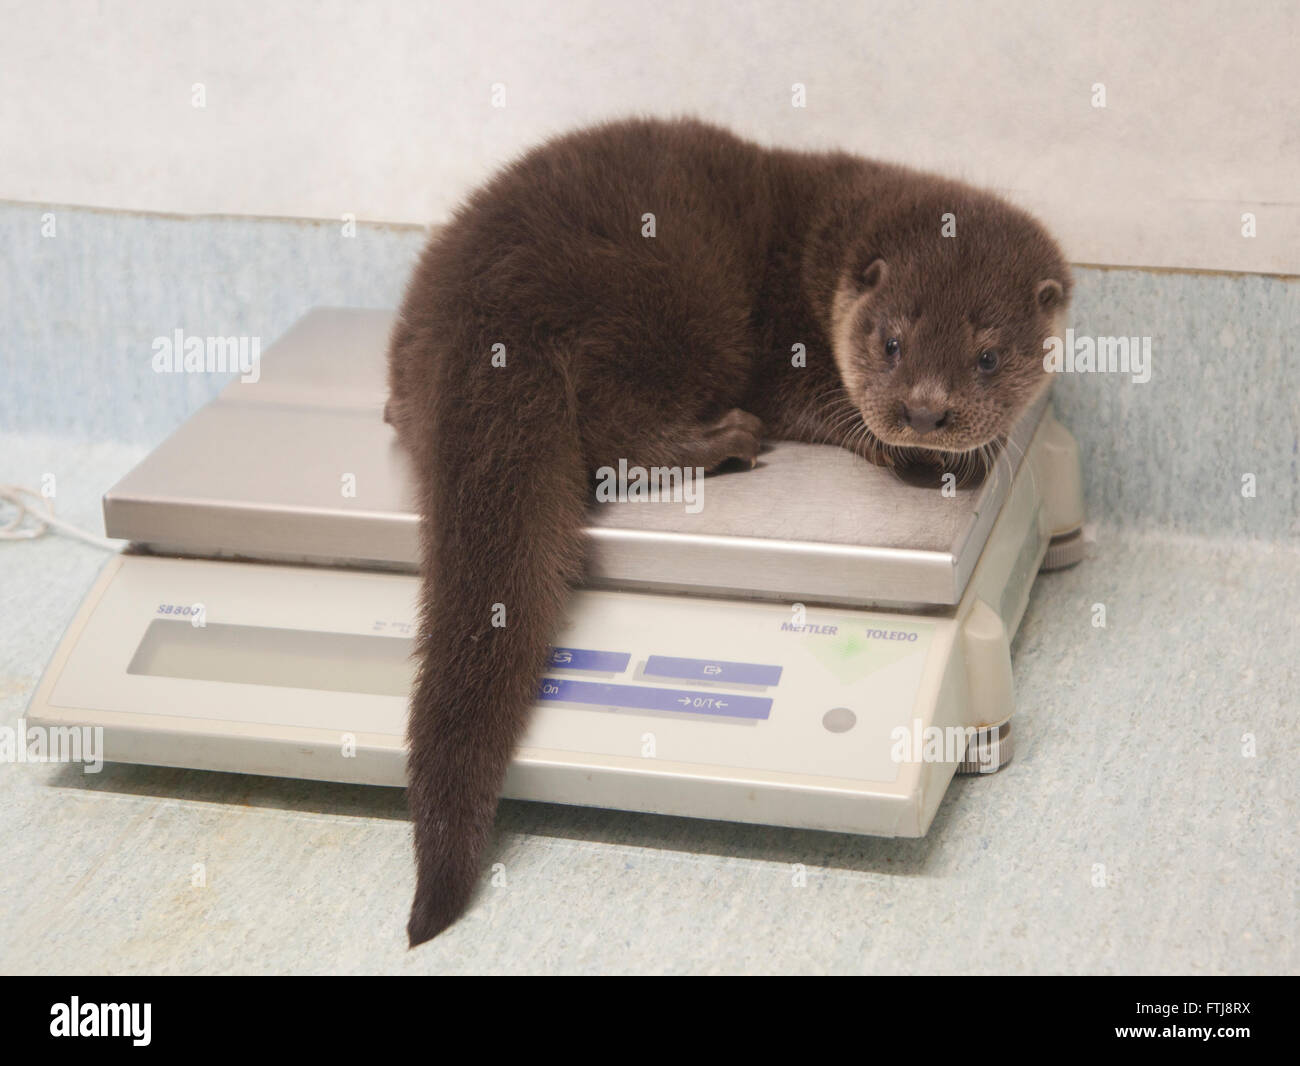 Orphaned European Otter cub being weighed at wildlife hospital Stock Photo